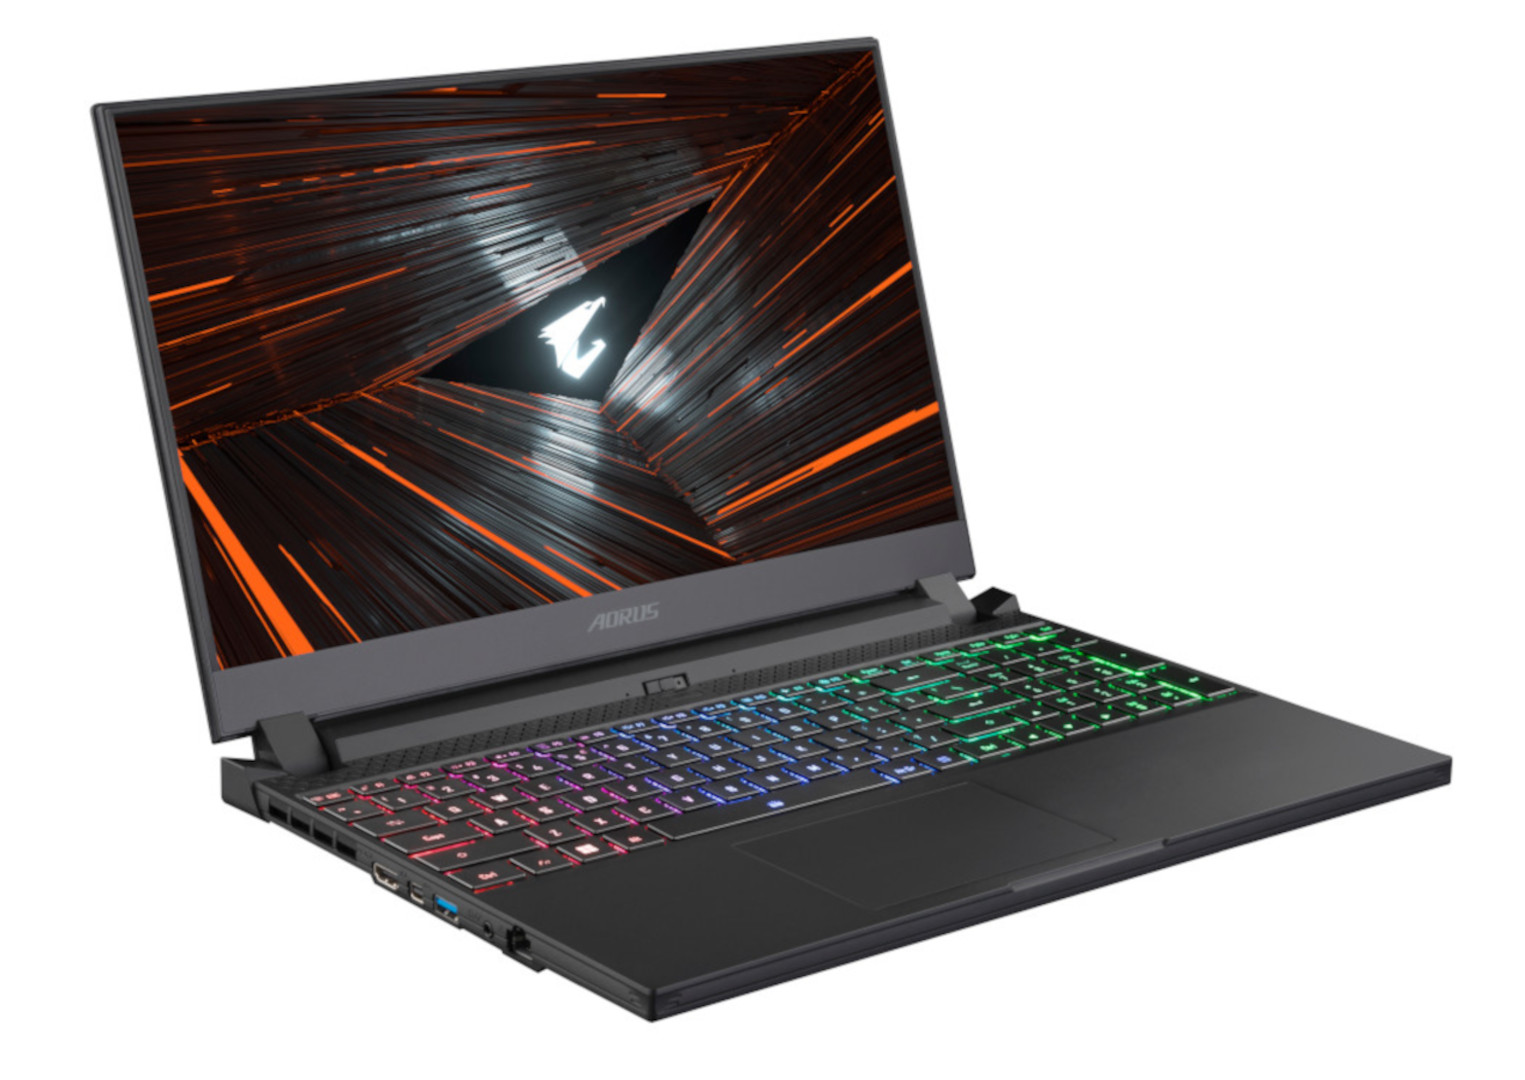 The best gaming laptop under $1,500 is the Gigabyte Aorus 5 SE4.